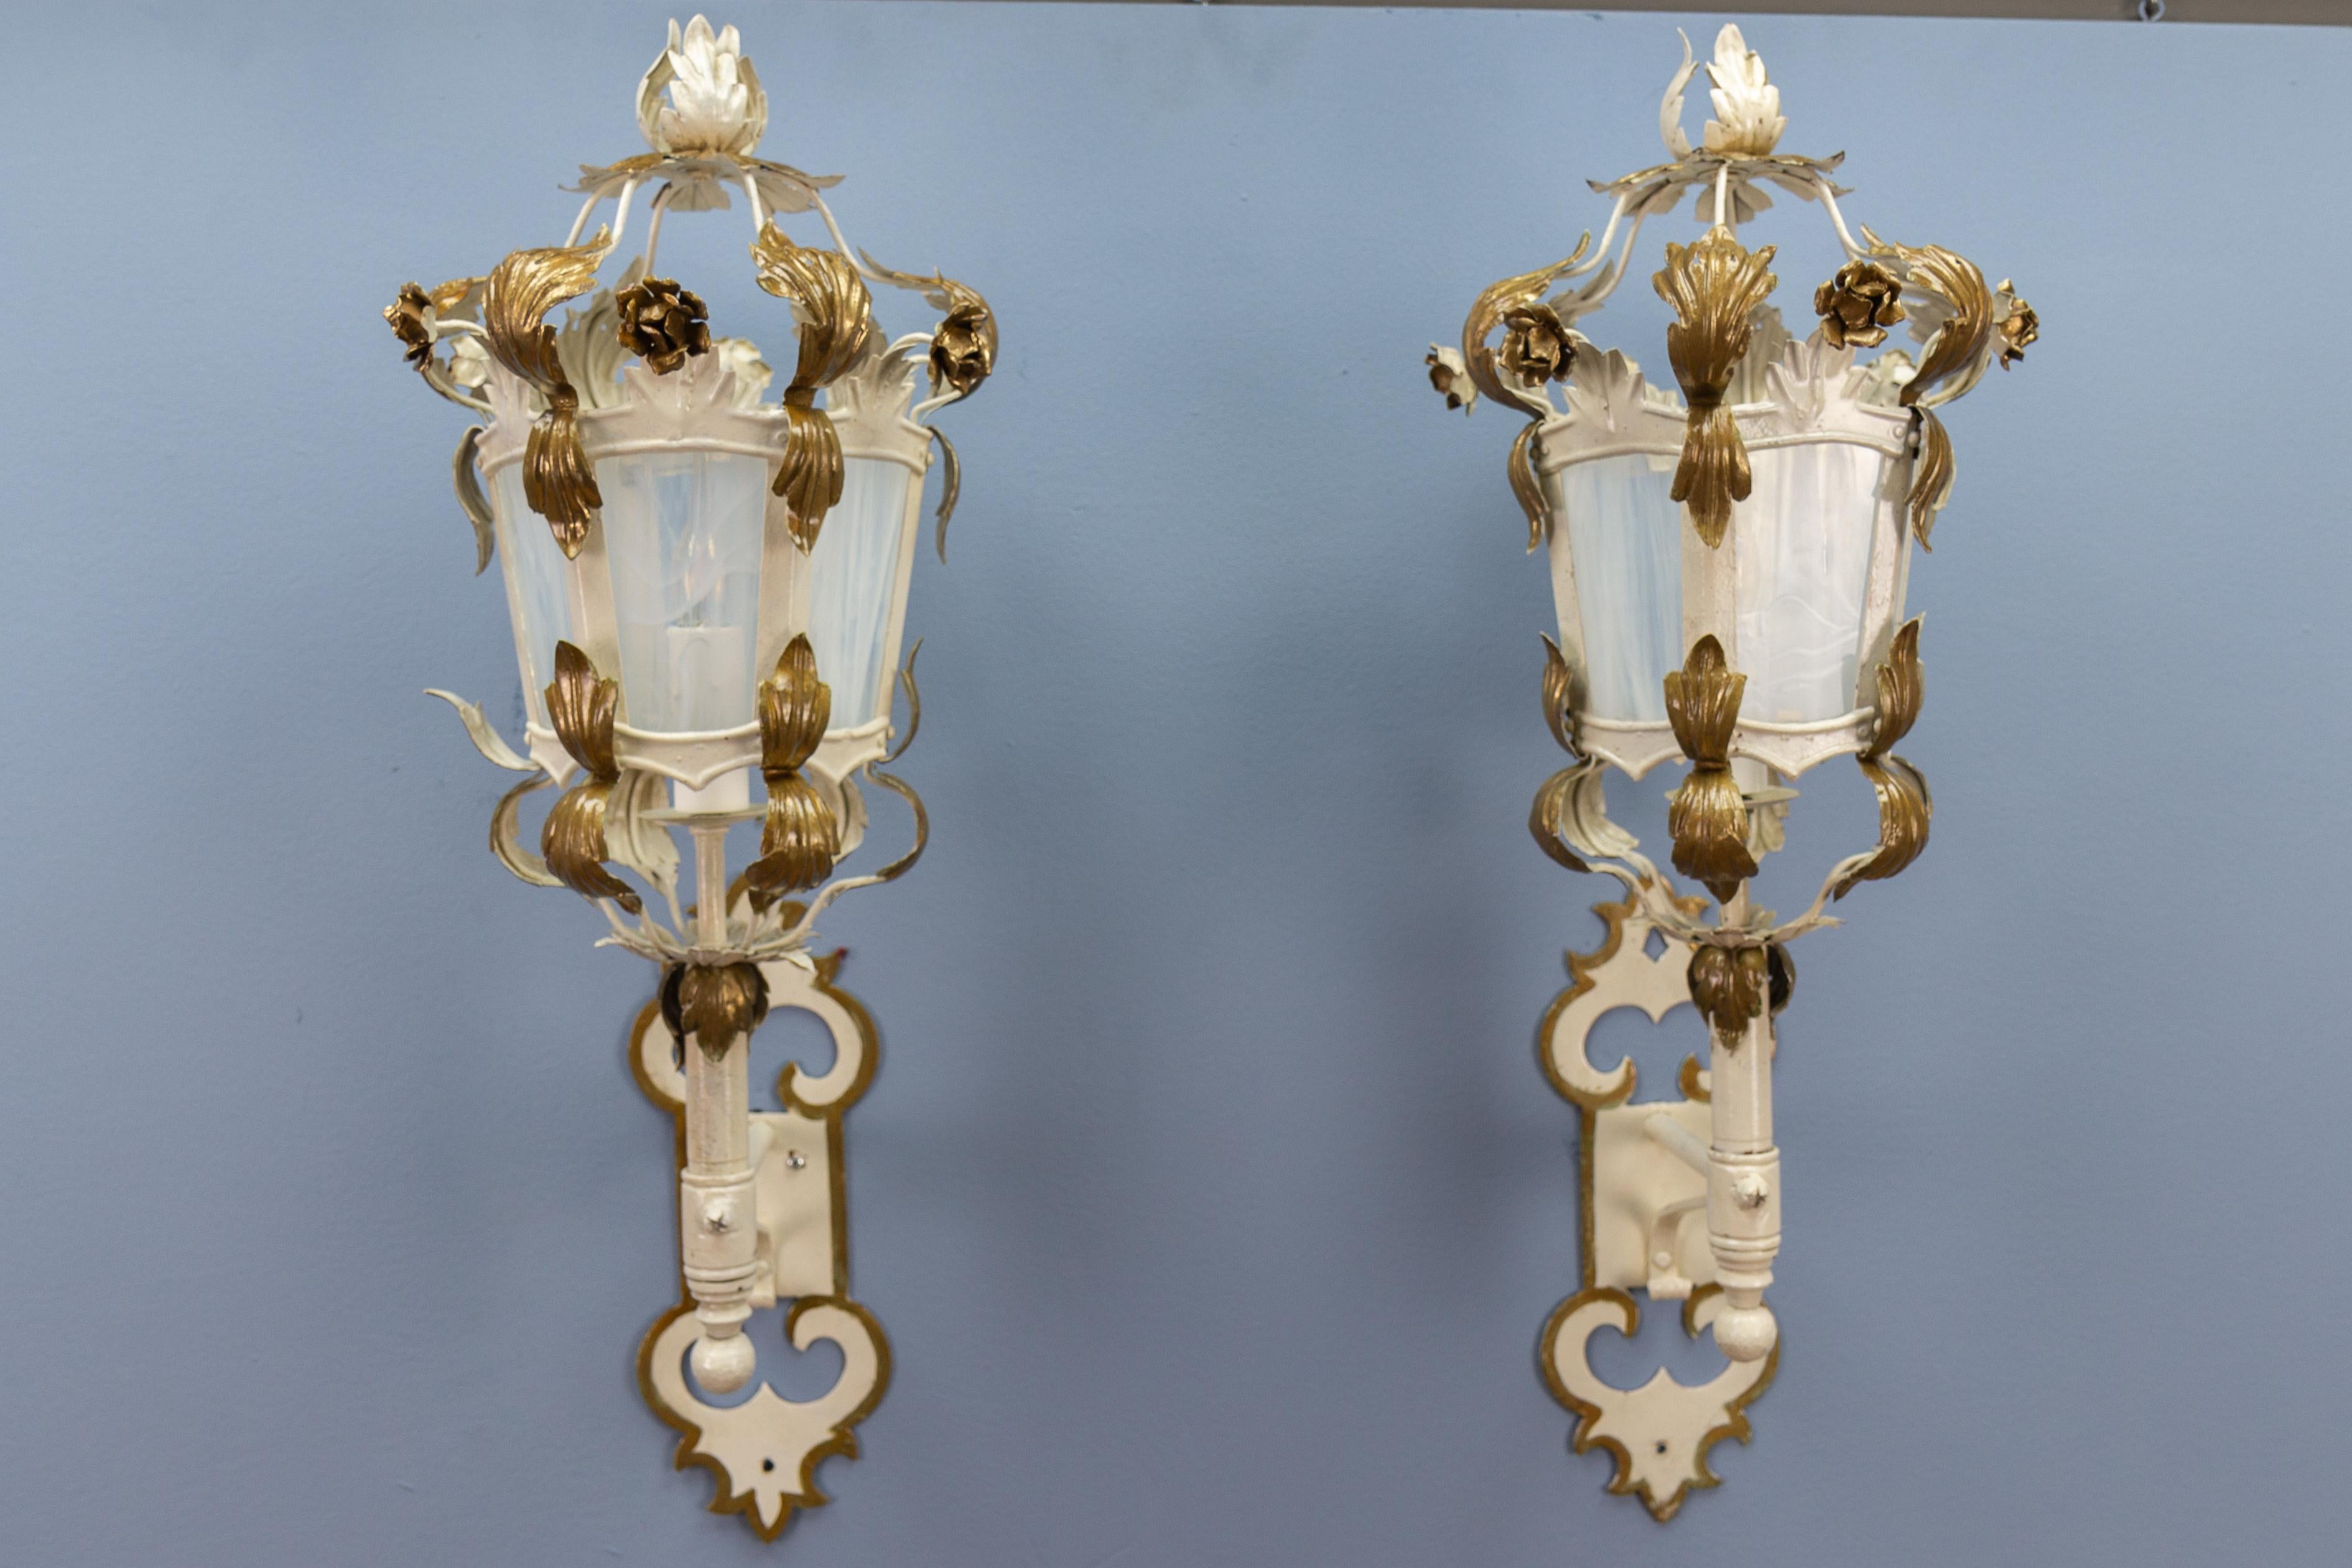 A pair of Italian white and golden color metal and glass wall lanterns from ca. 1970s.
This adorable pair of wall lanterns features a white painted metal frame with golden accents - leaves and flowers. White and partially translucent glass